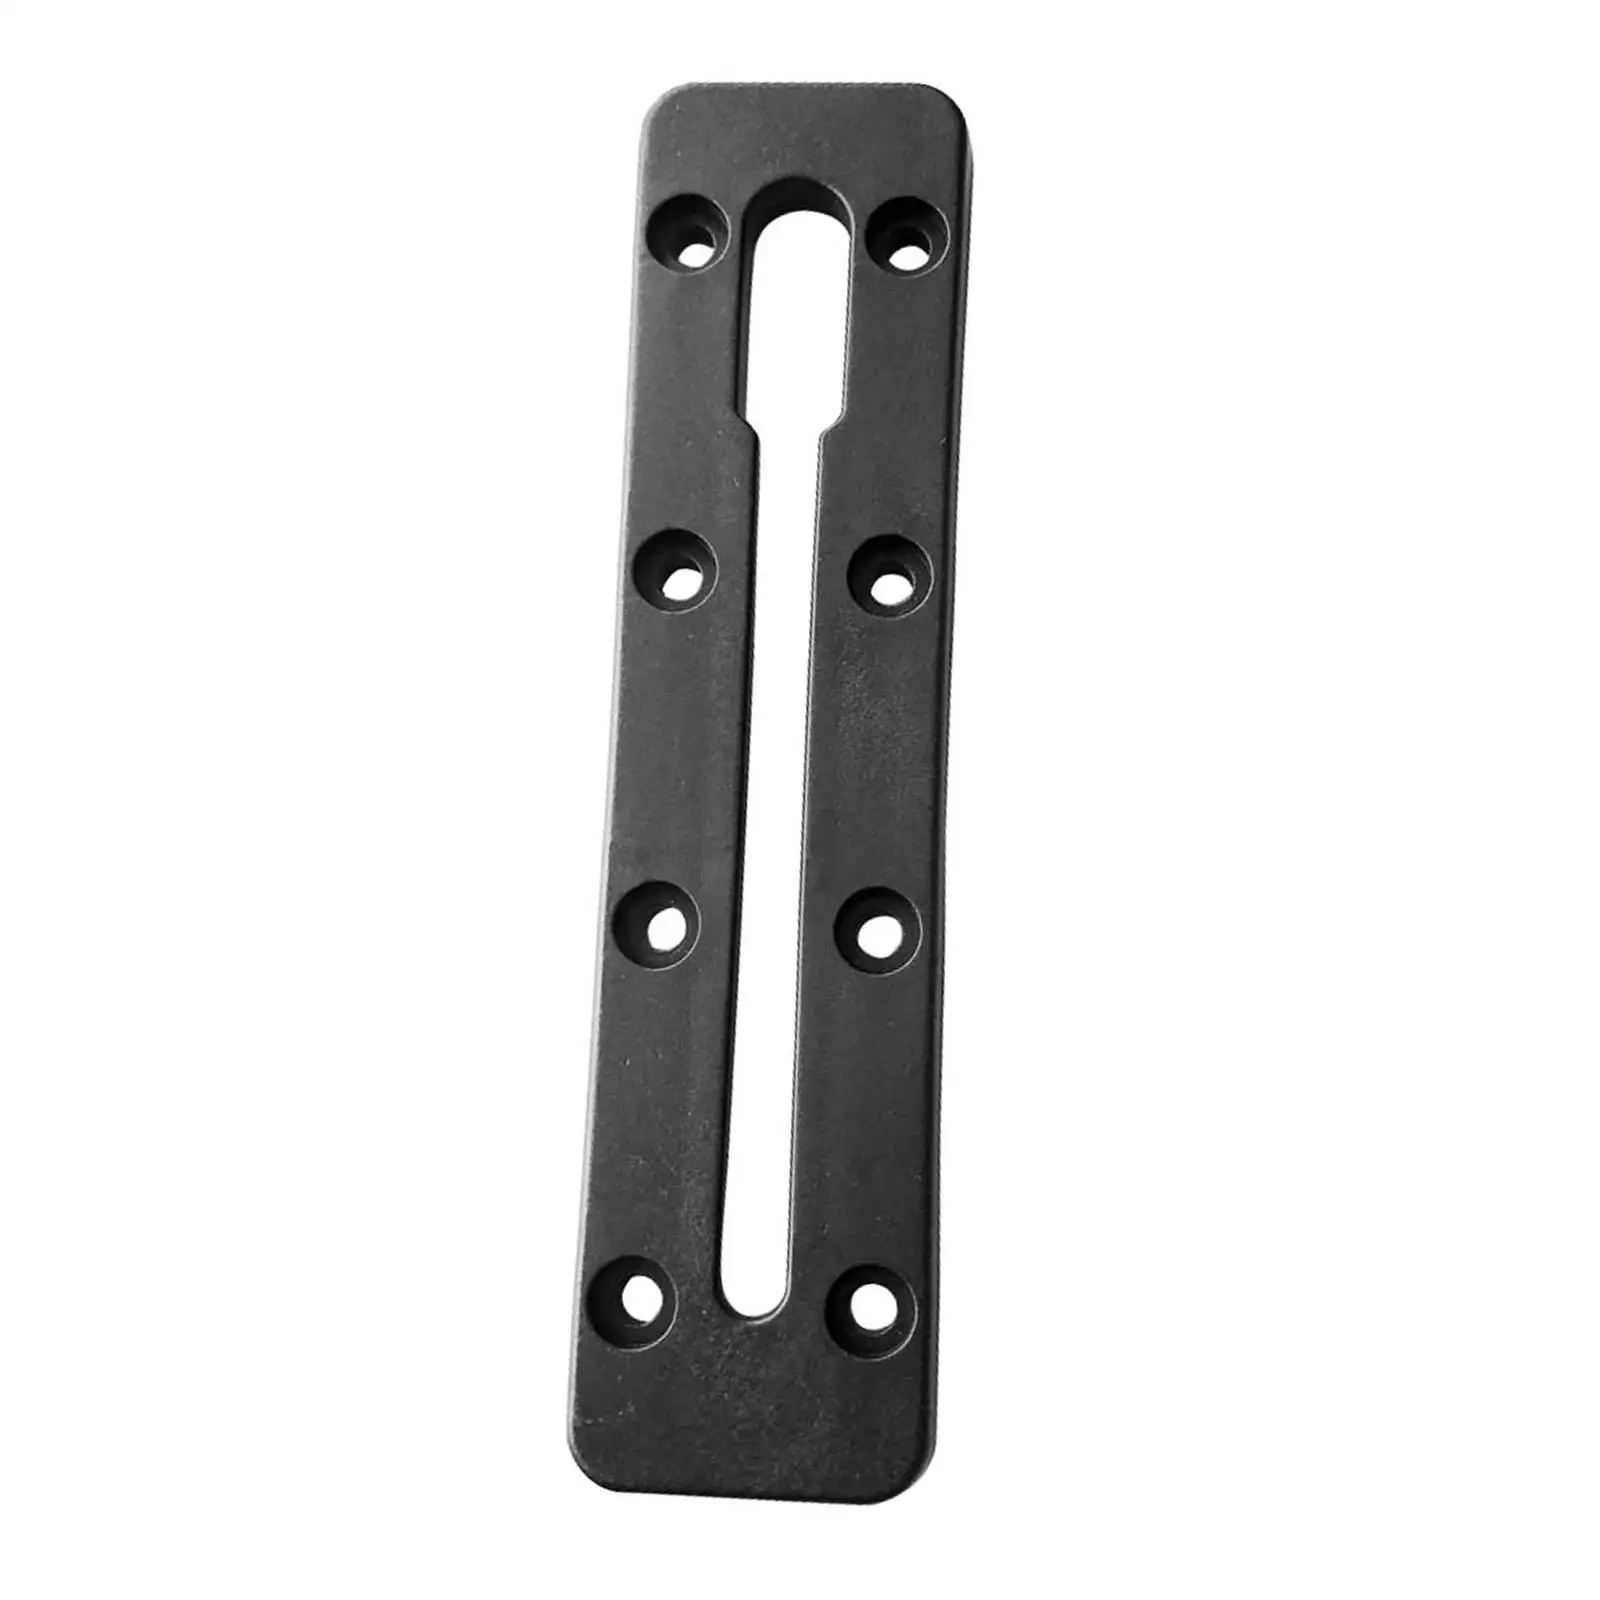 Kayak Slide Track Replaces Accessories Easy to Install Convenient for Kayak